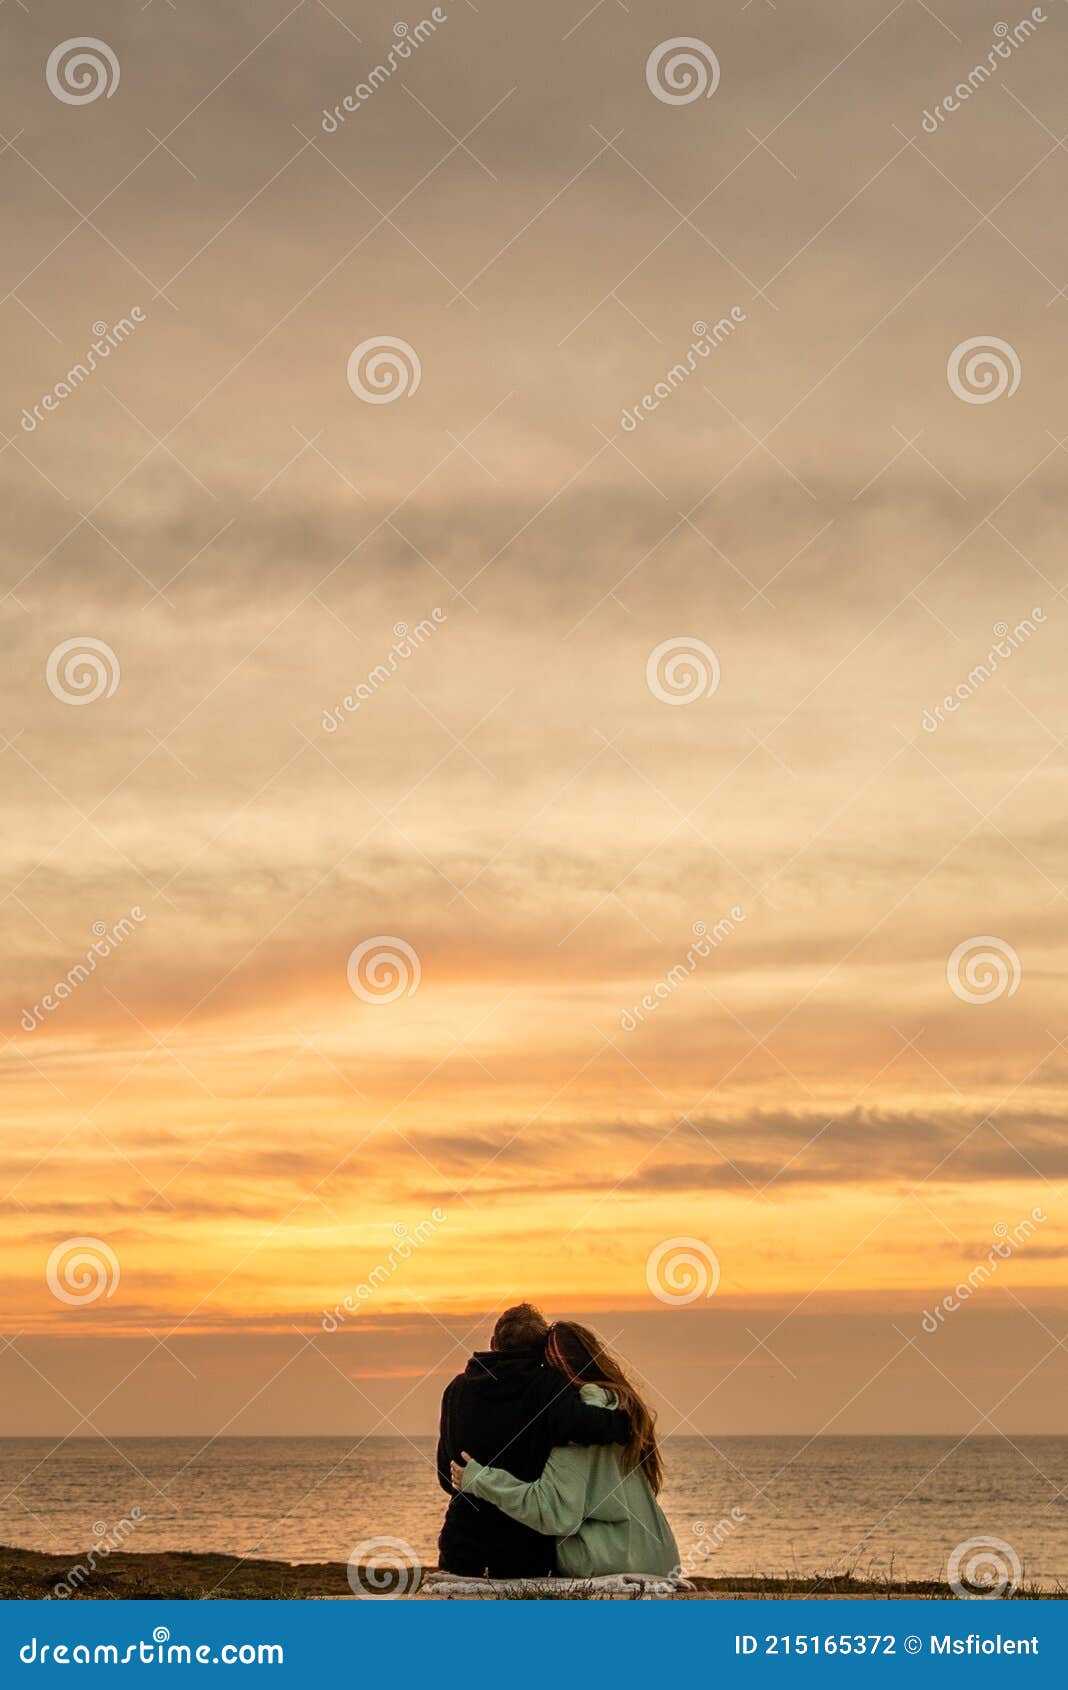 Couple In Love Watching Sunset Together On Beach Travel Summer Holidays People Silhouette From